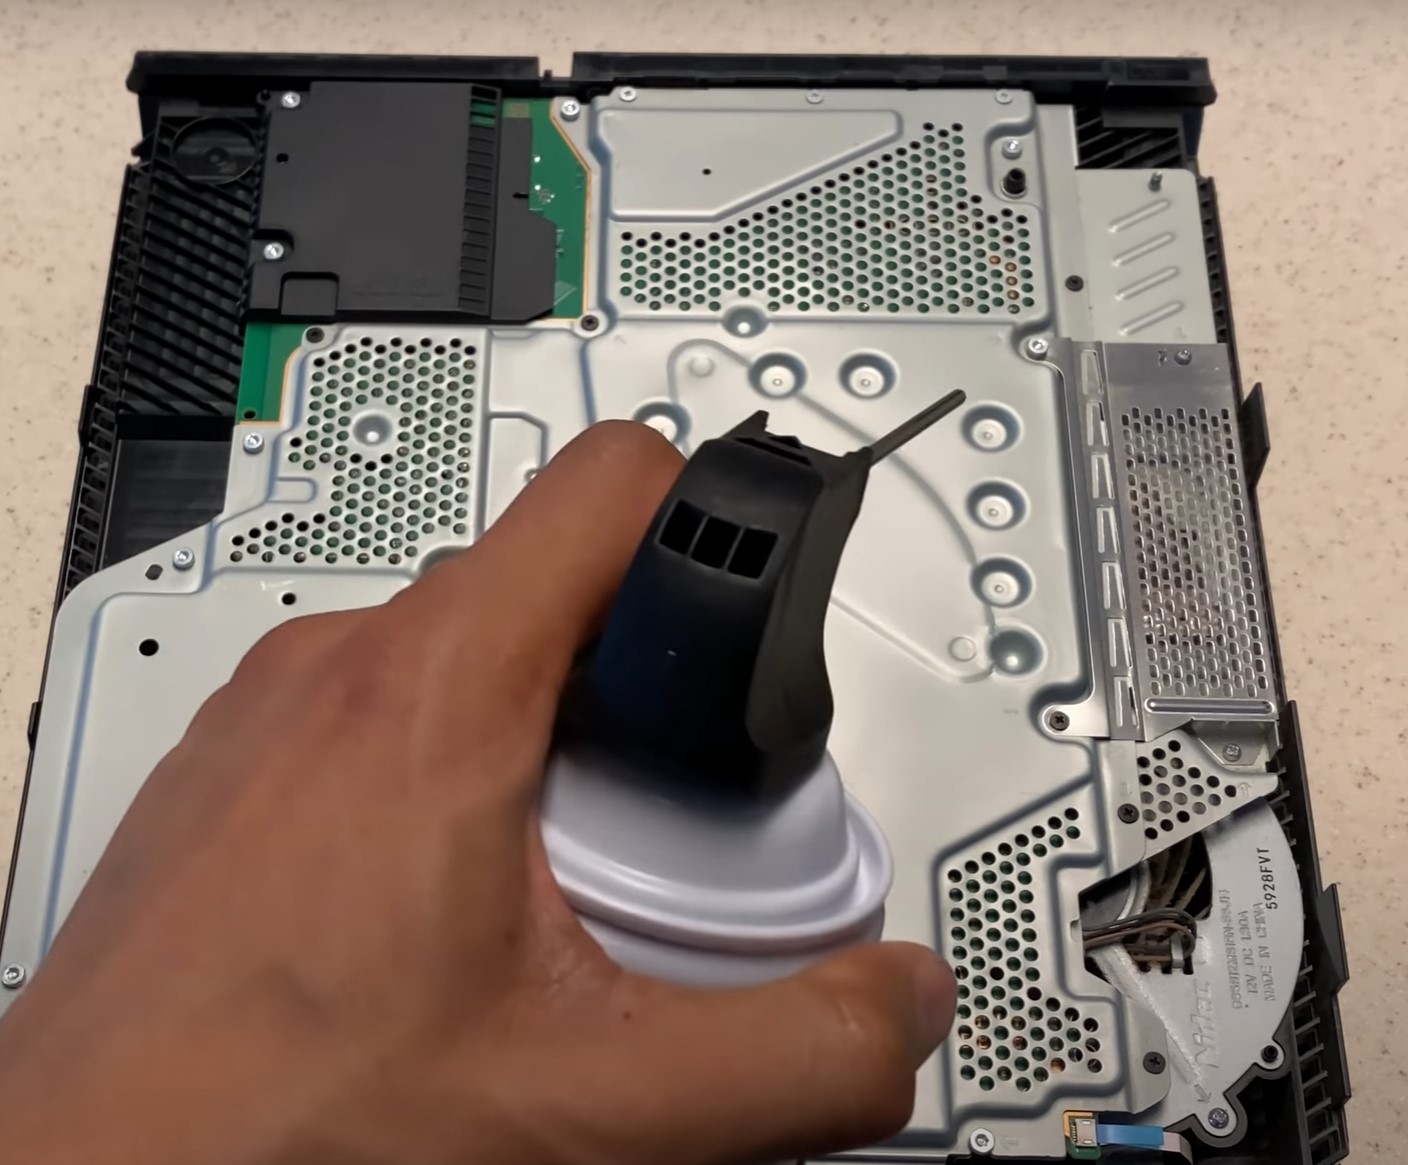 using compressed air can to clean the front side of playstation 4.